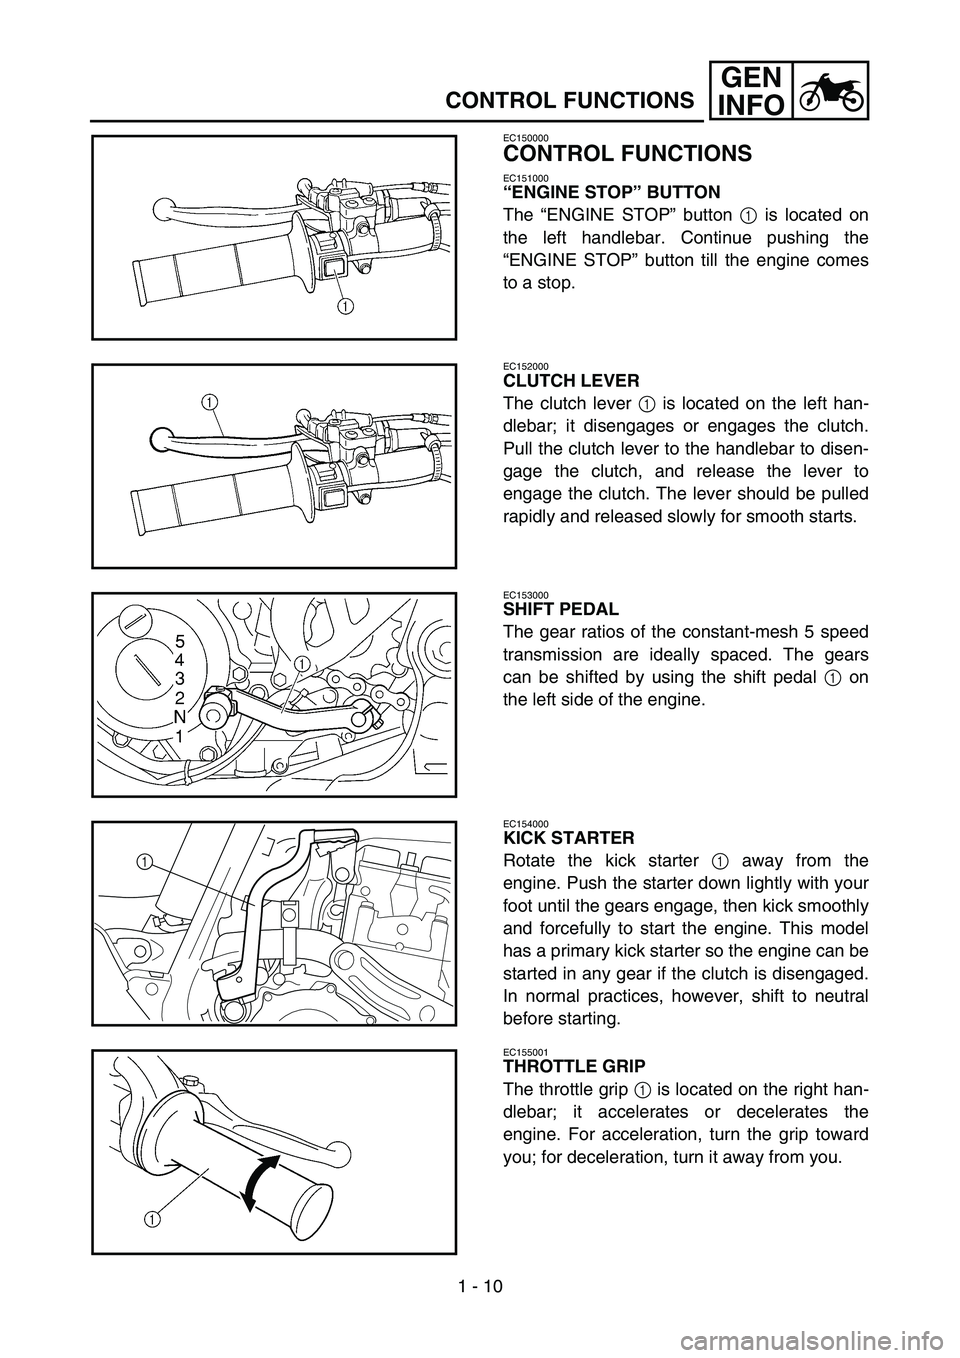 YAMAHA YZ450F 2006  Owners Manual 1 - 10
GEN
INFO
CONTROL FUNCTIONS
EC150000
CONTROL FUNCTIONS
EC151000
“ENGINE STOP” BUTTON
The “ENGINE STOP” button 1 is located on
the left handlebar. Continue pushing the
“ENGINE STOP” b